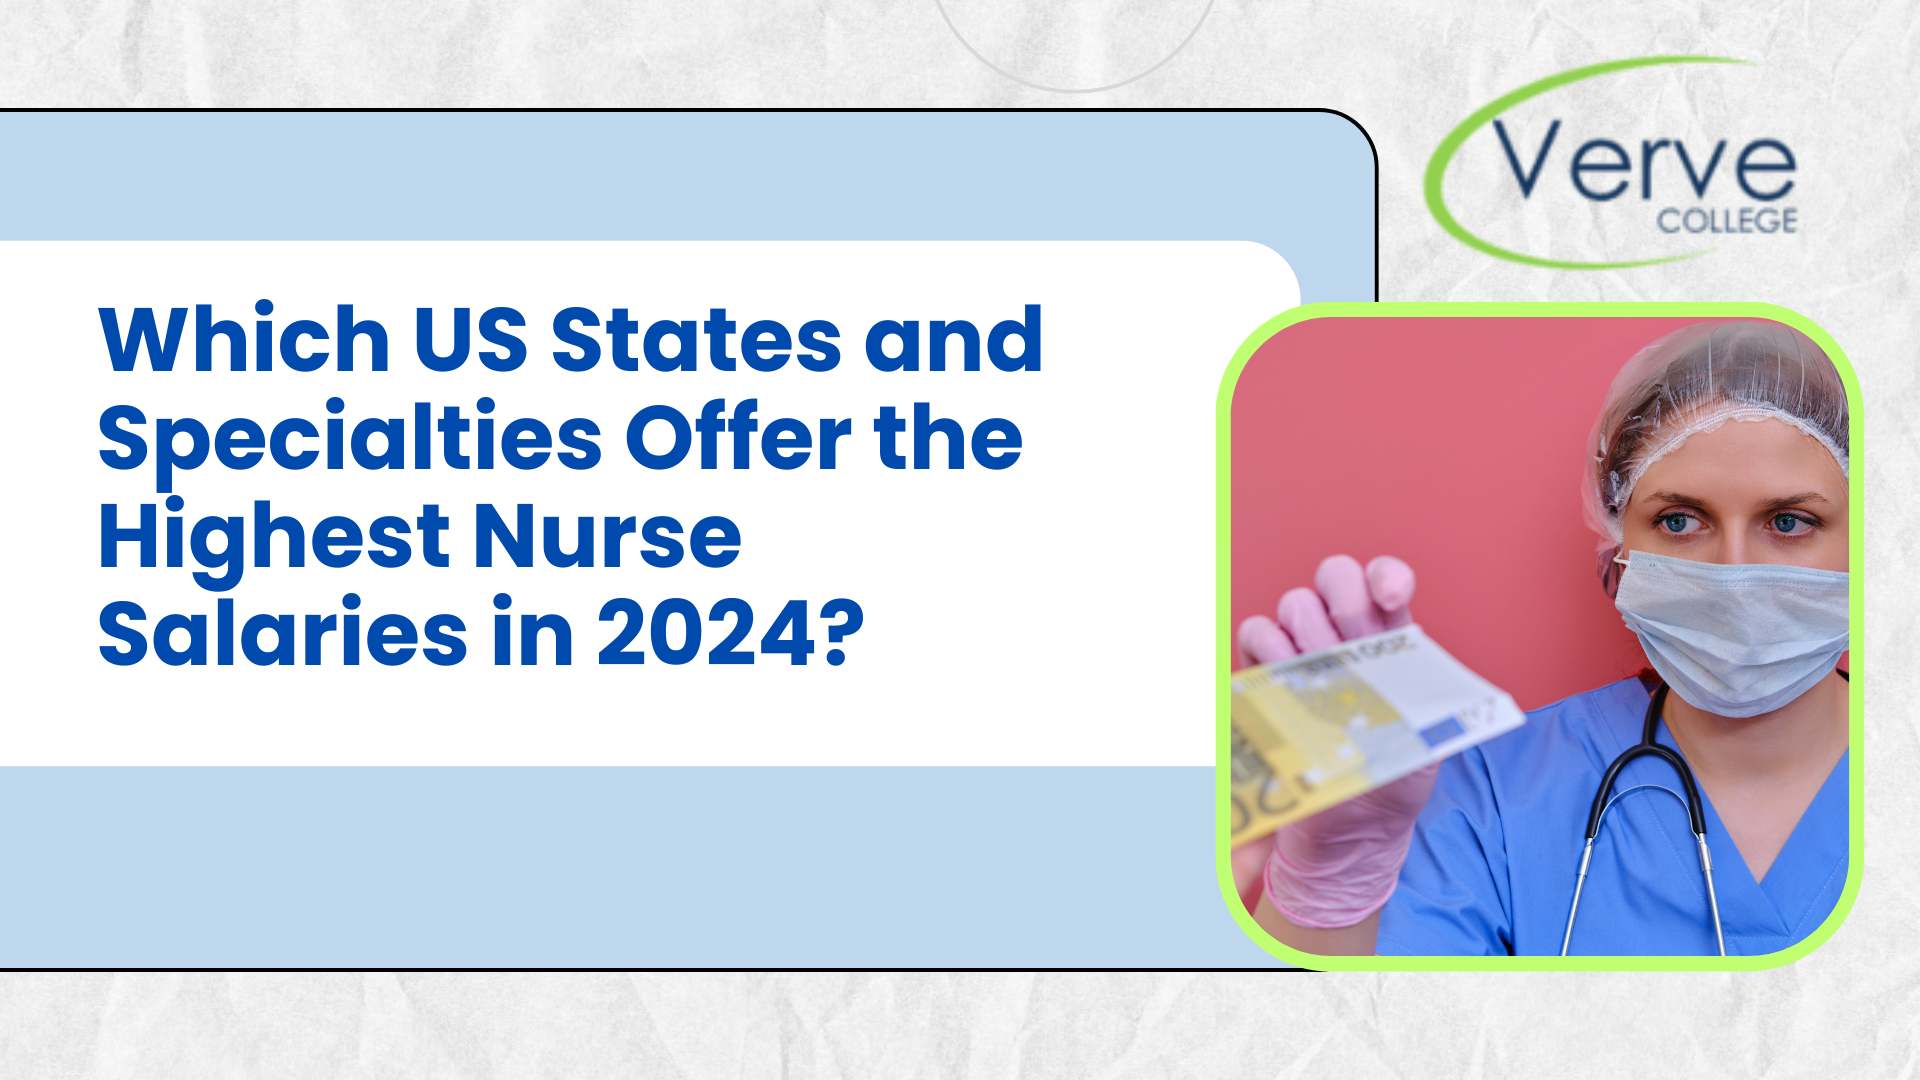 Which US States and Specialties Offer the Highest Nurse Salaries in 2024?